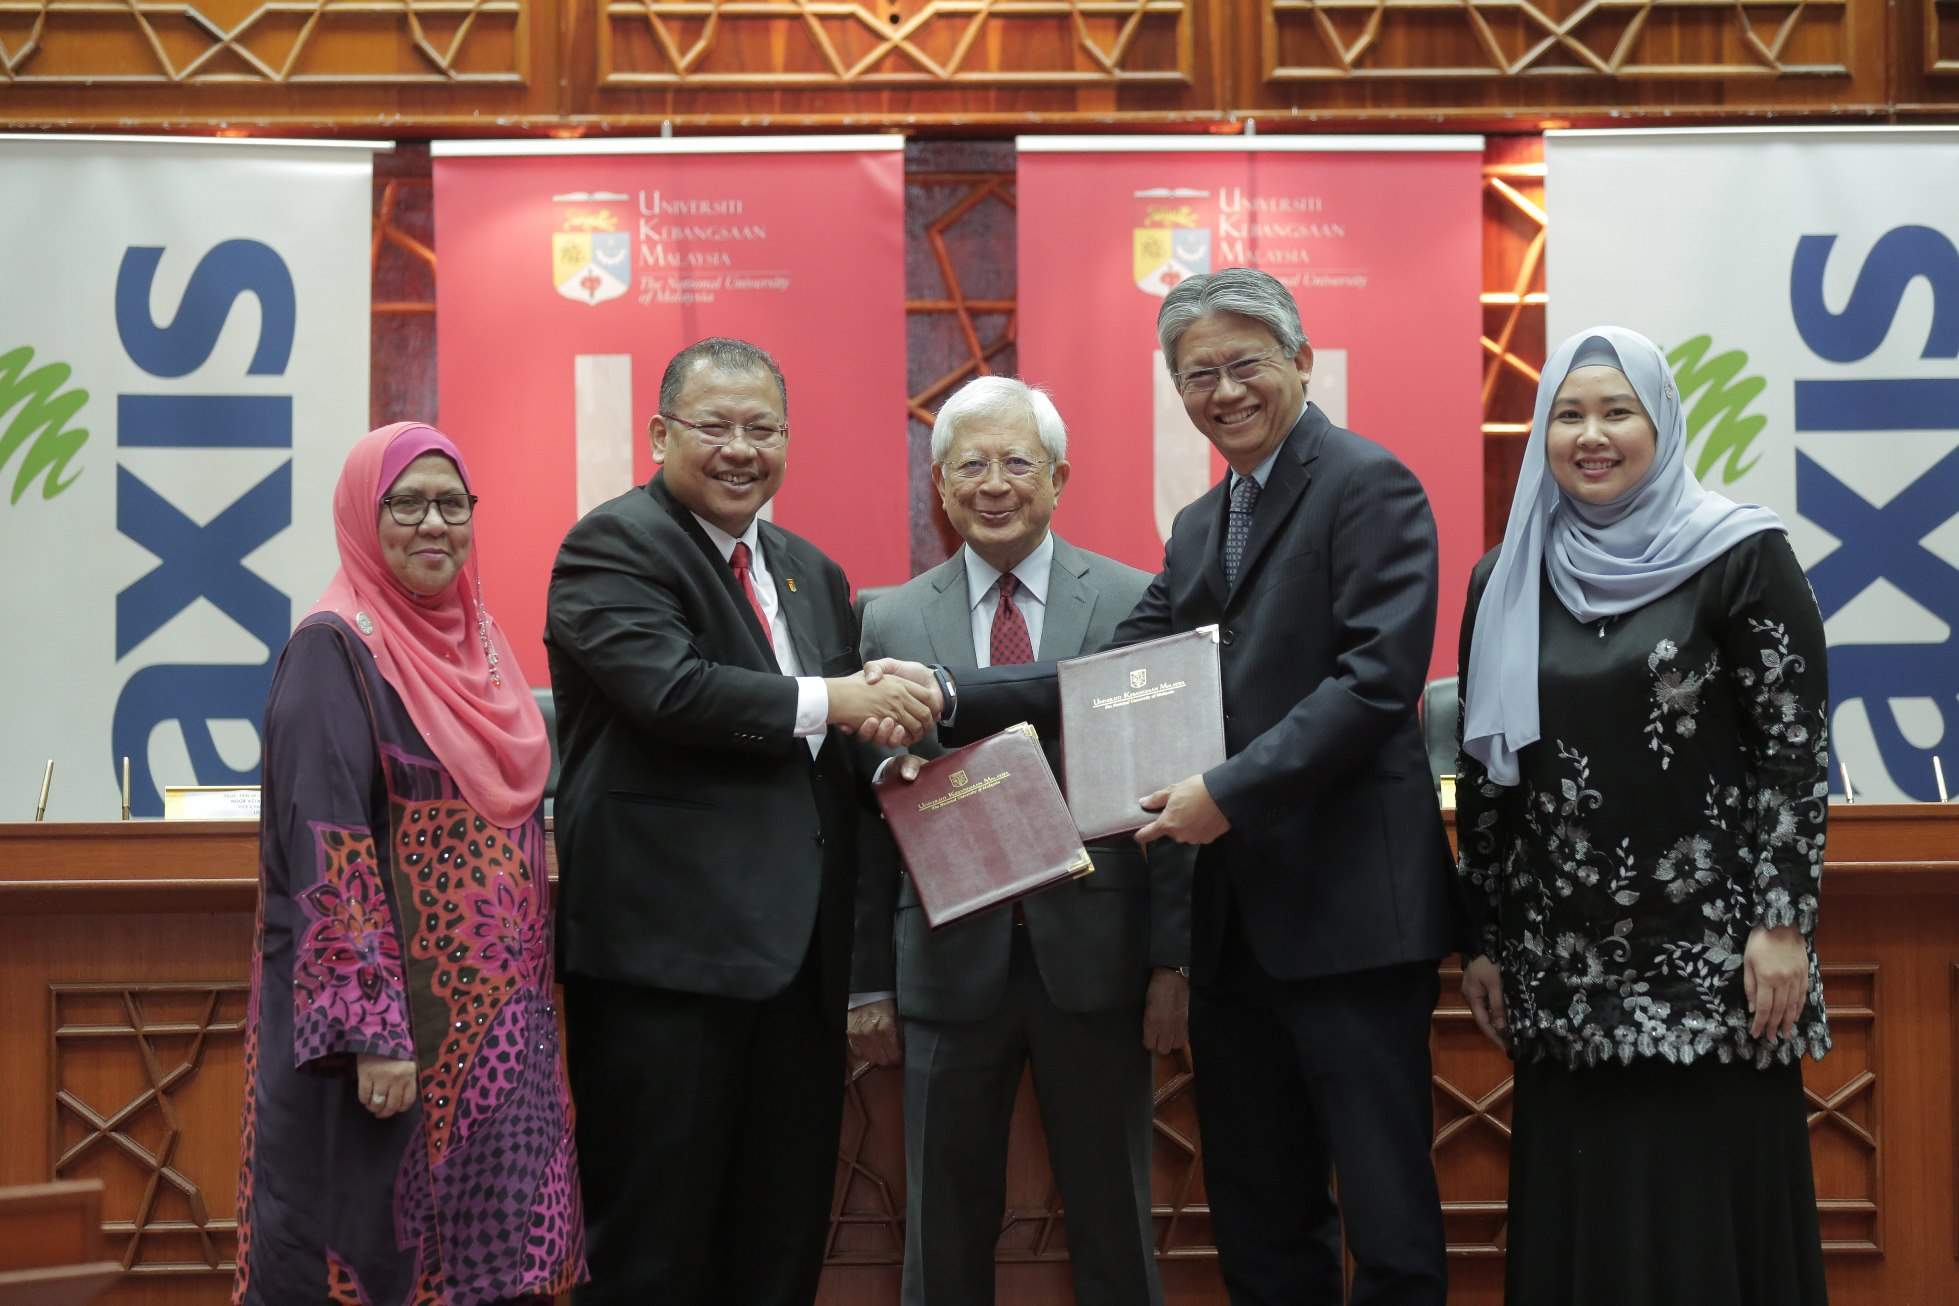 New collaboration Maxis and UKM gives their campuses free WiFi access